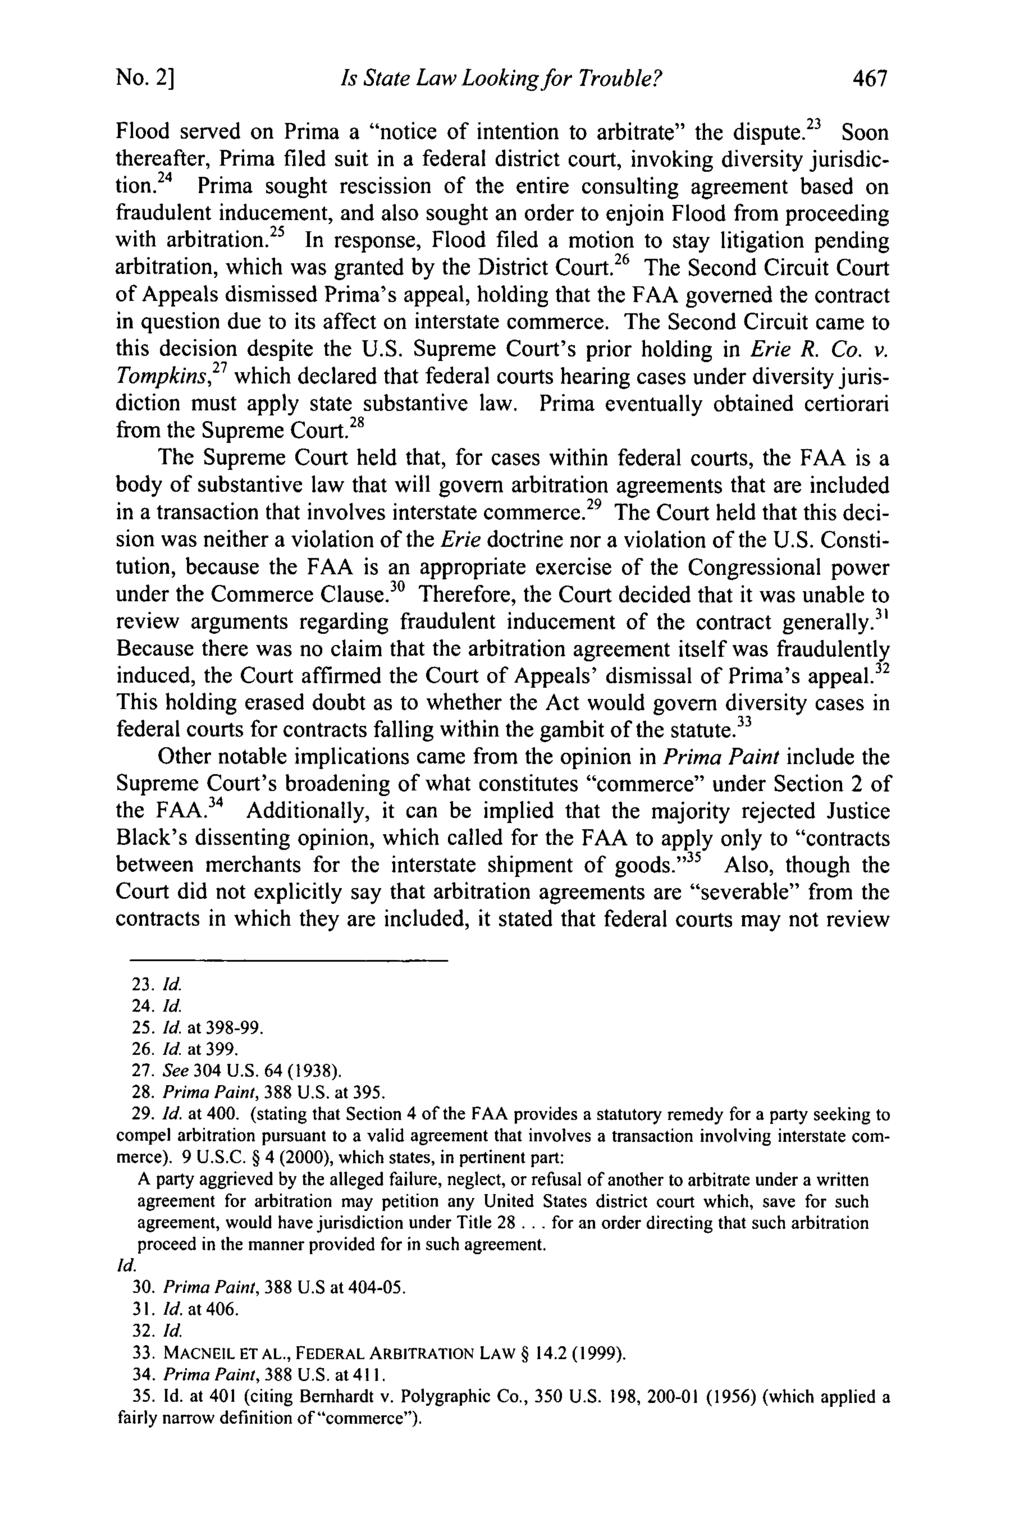 No. 21 Hollis et al.: Hollis: Is State Law Looking for Trouble Is State Law Looking for Trouble? Flood served on Prima a "notice of intention to arbitrate" the dispute.